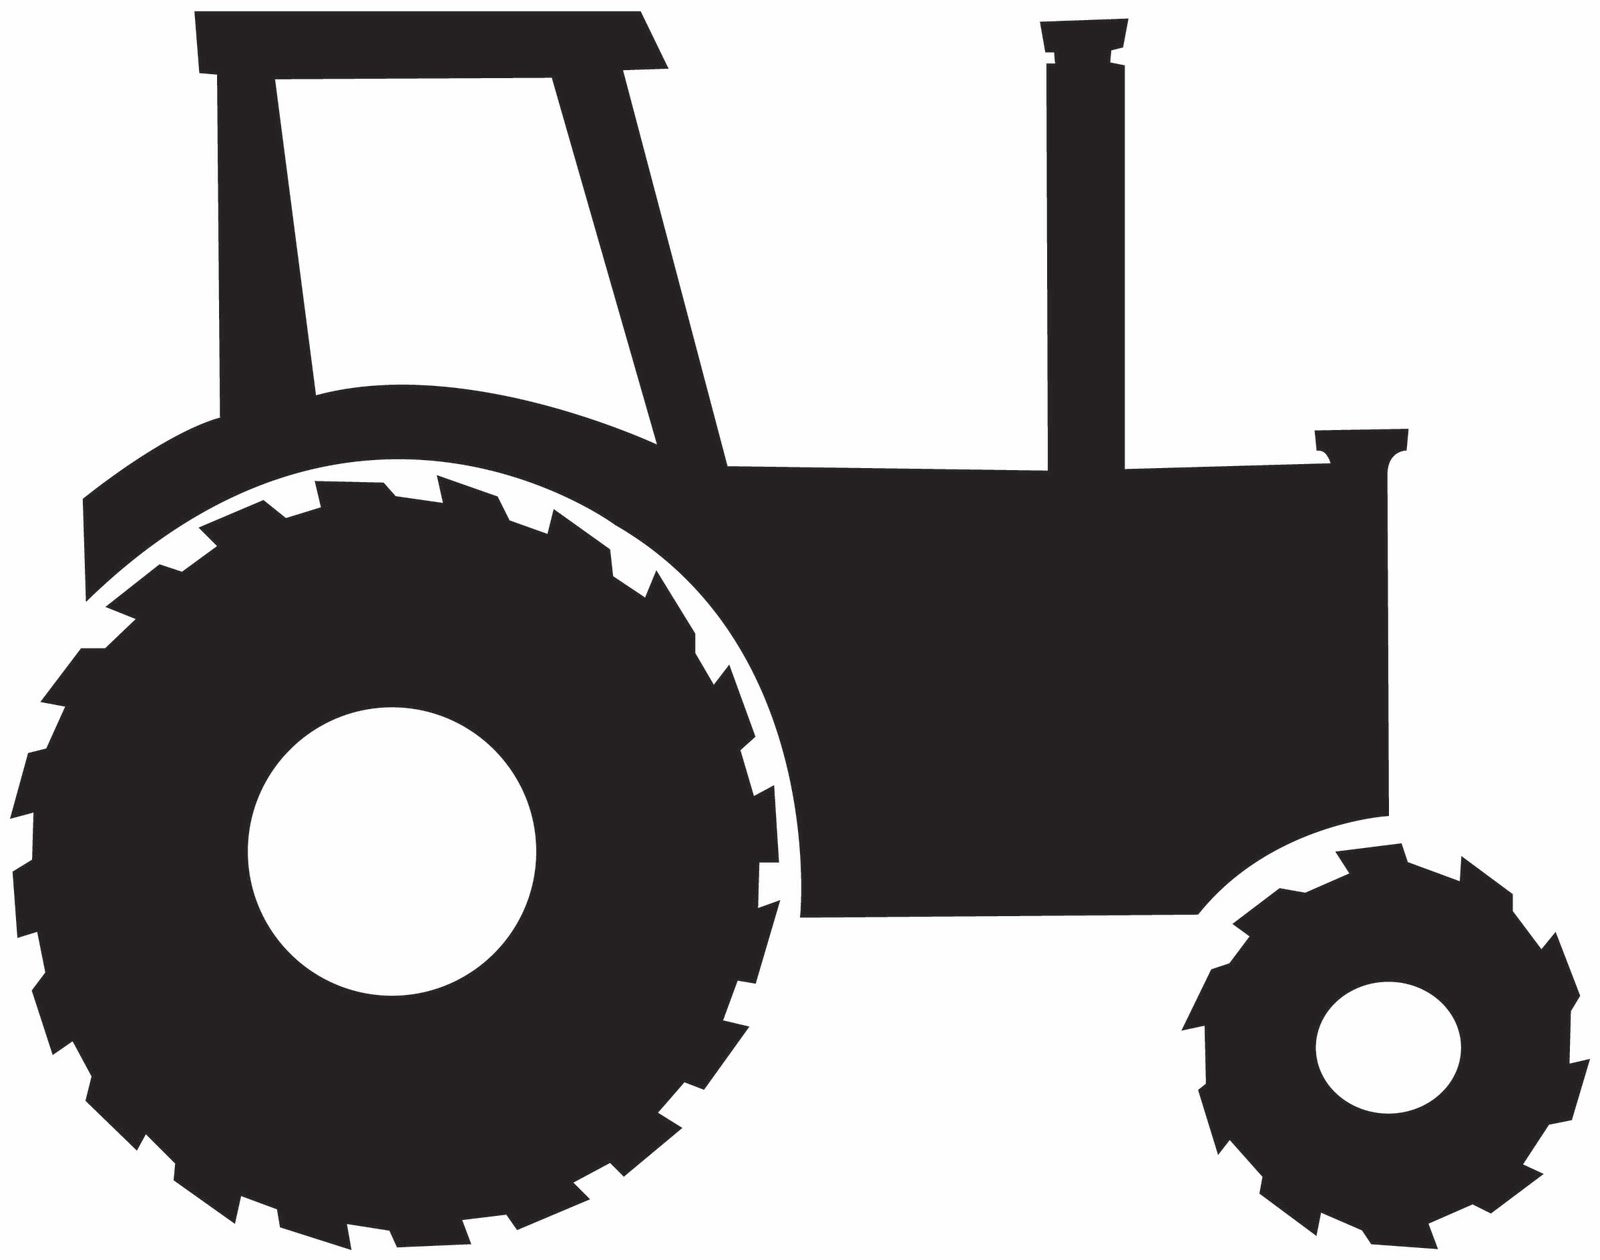 Free tractor clipart free clipart graphics image and photos image